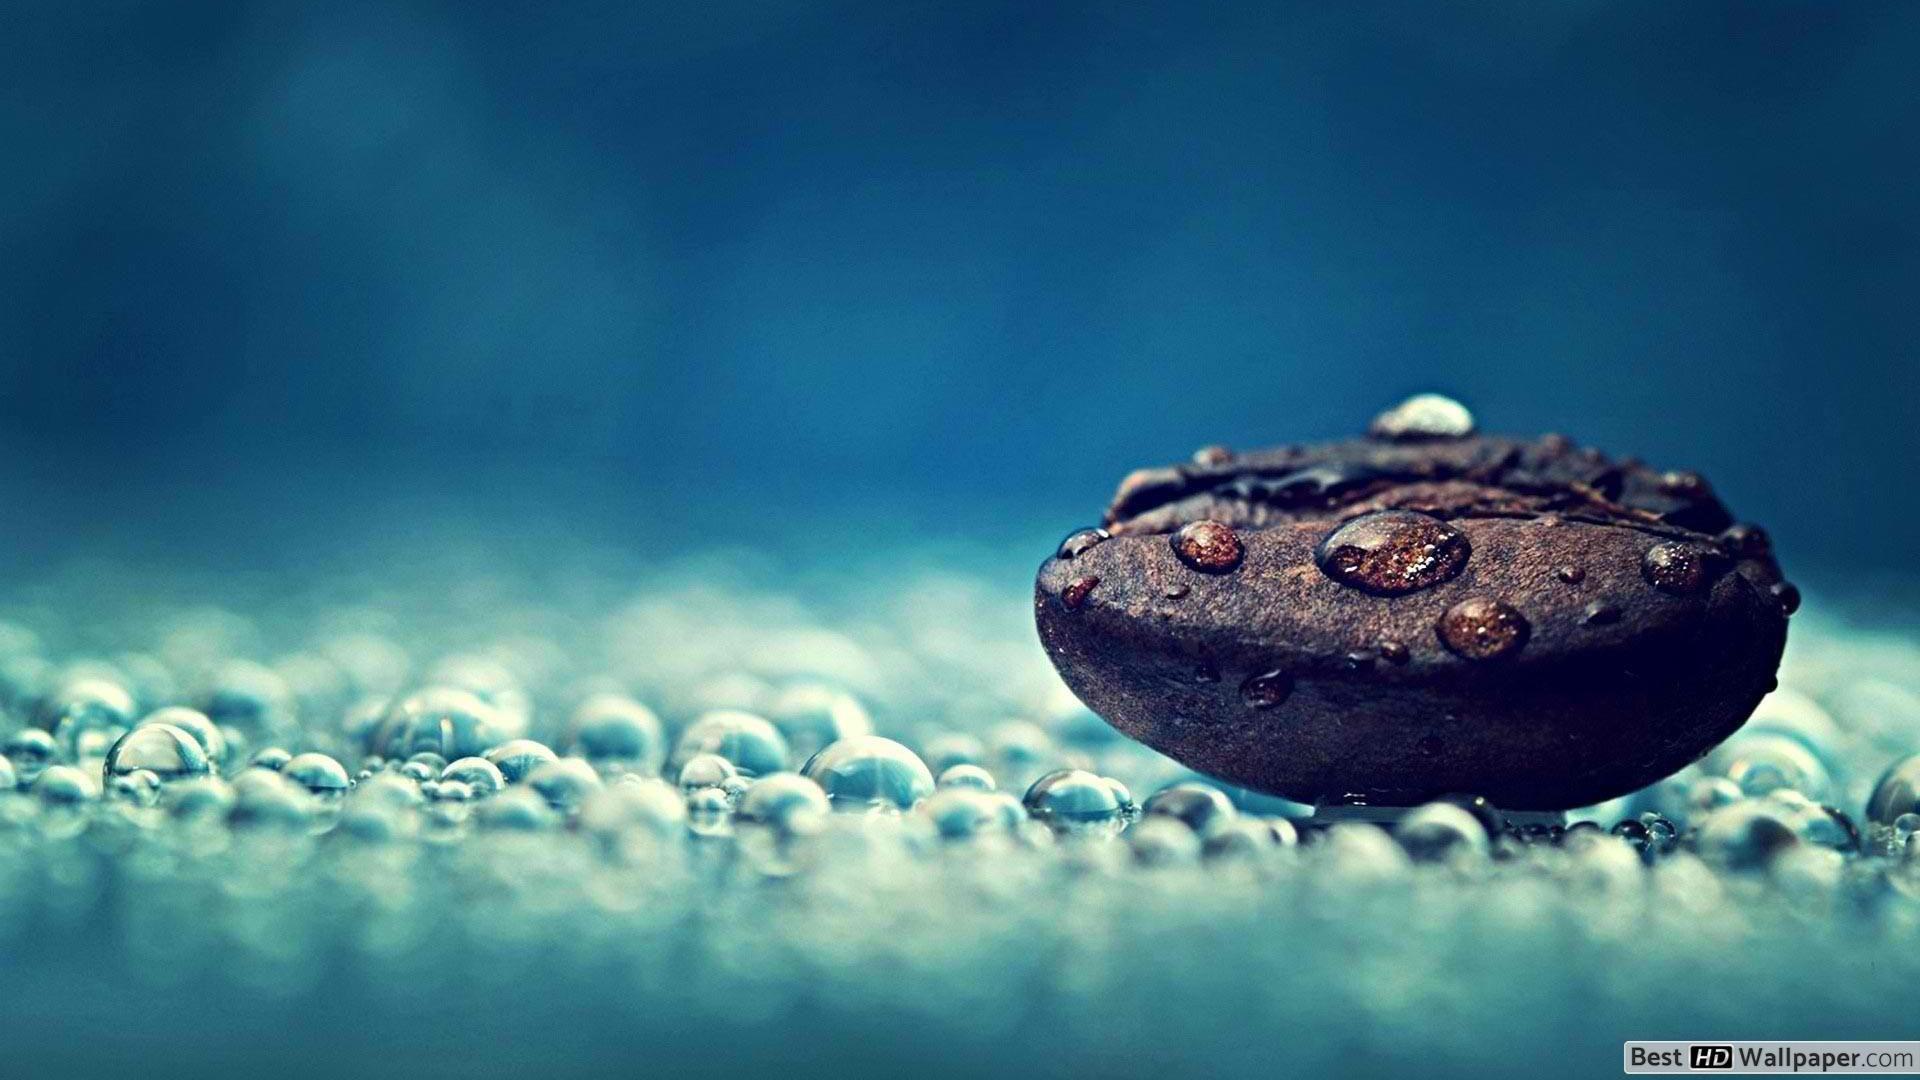 Stone and water drops HD wallpaper download